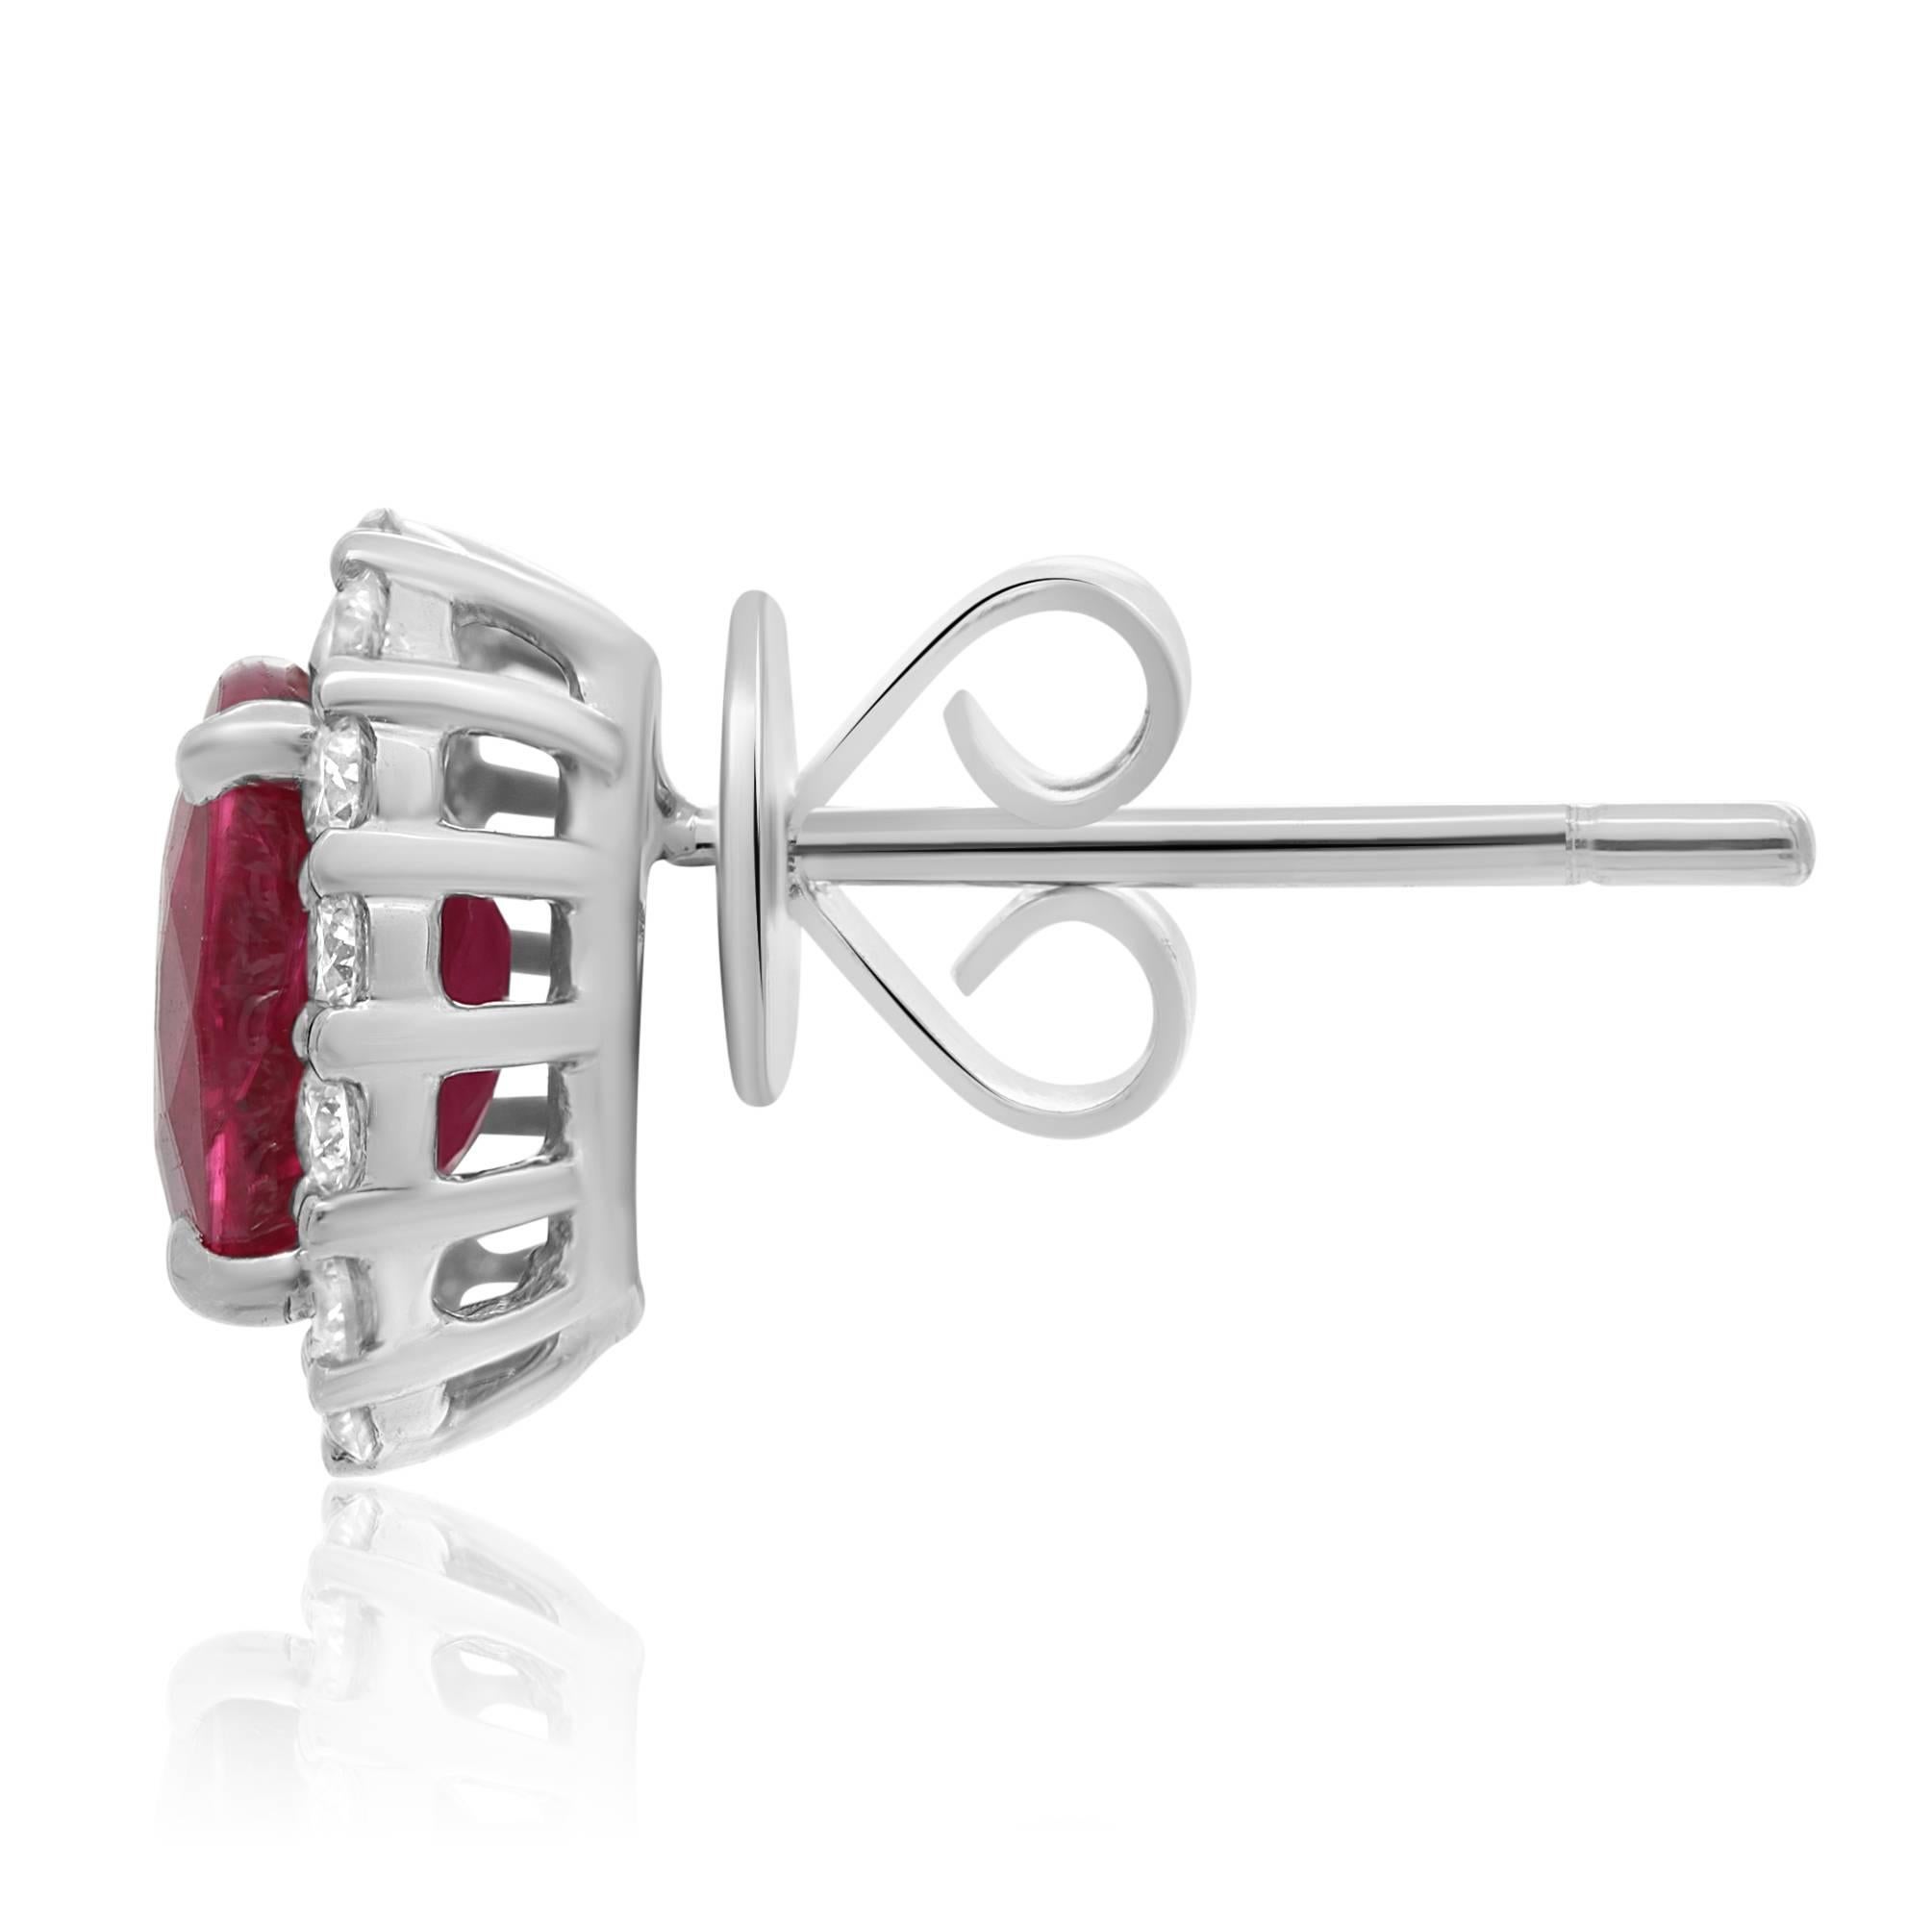 Contemporary GIA Certified Oval Ruby Diamond Halo Earrings Offered by Marisa Perry Atelier For Sale